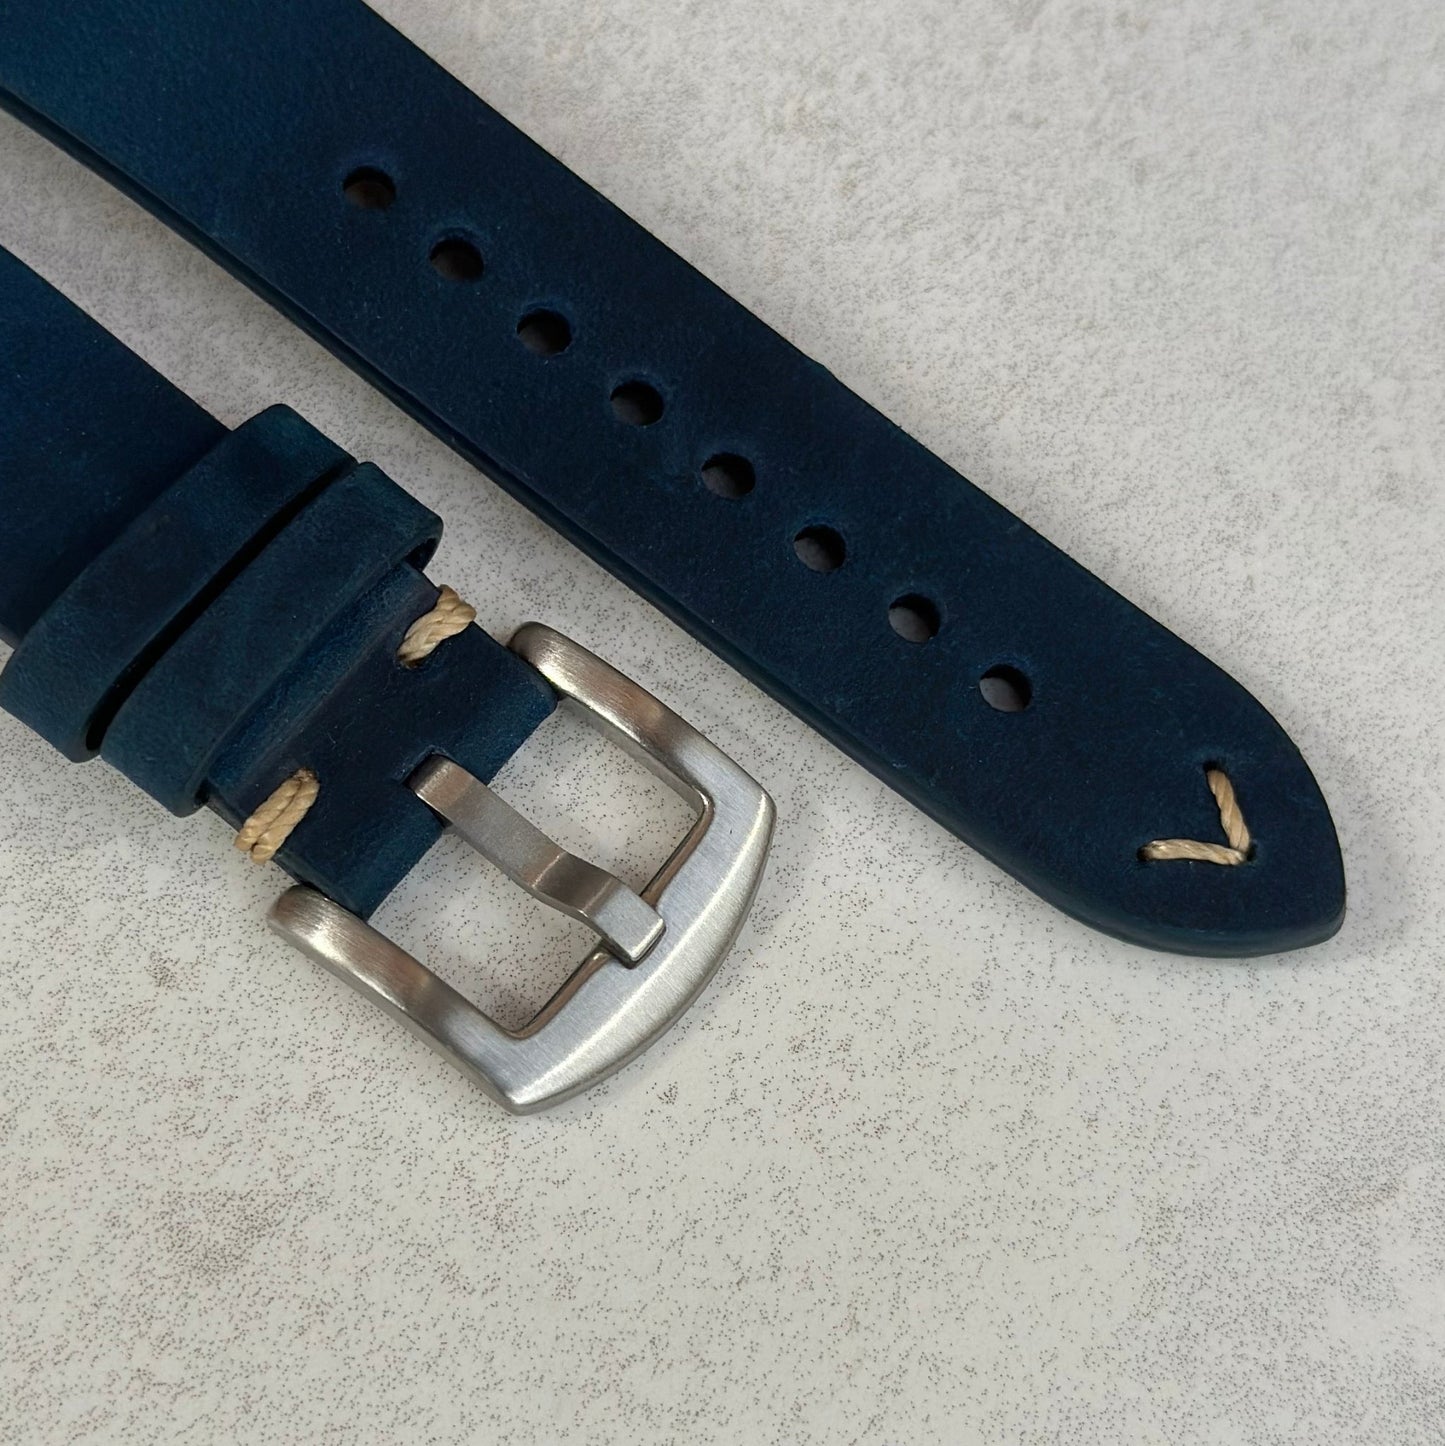 Brushed 316L stainless steel buckle on the Madrid midnight blue horse leather watch strap.